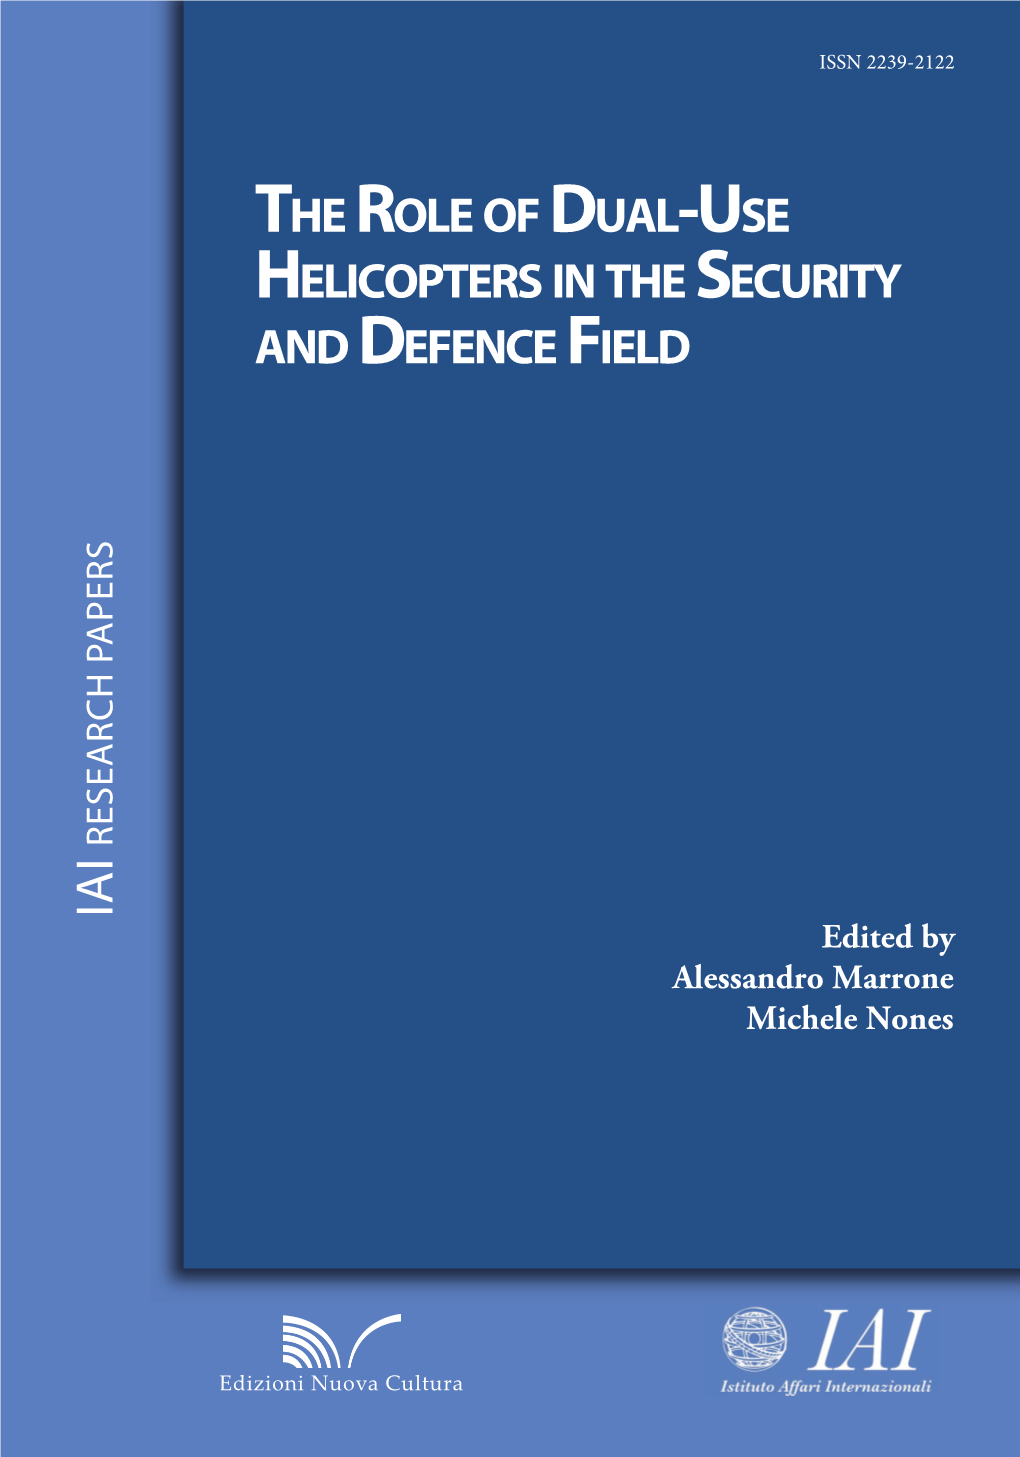 The Role of Dual-Use Helicopters in the Security and Defence Field, Edited by Alessandro Marrone and Michele Nones, 2015 14.50 EURO Edizioni Nuova Cultura